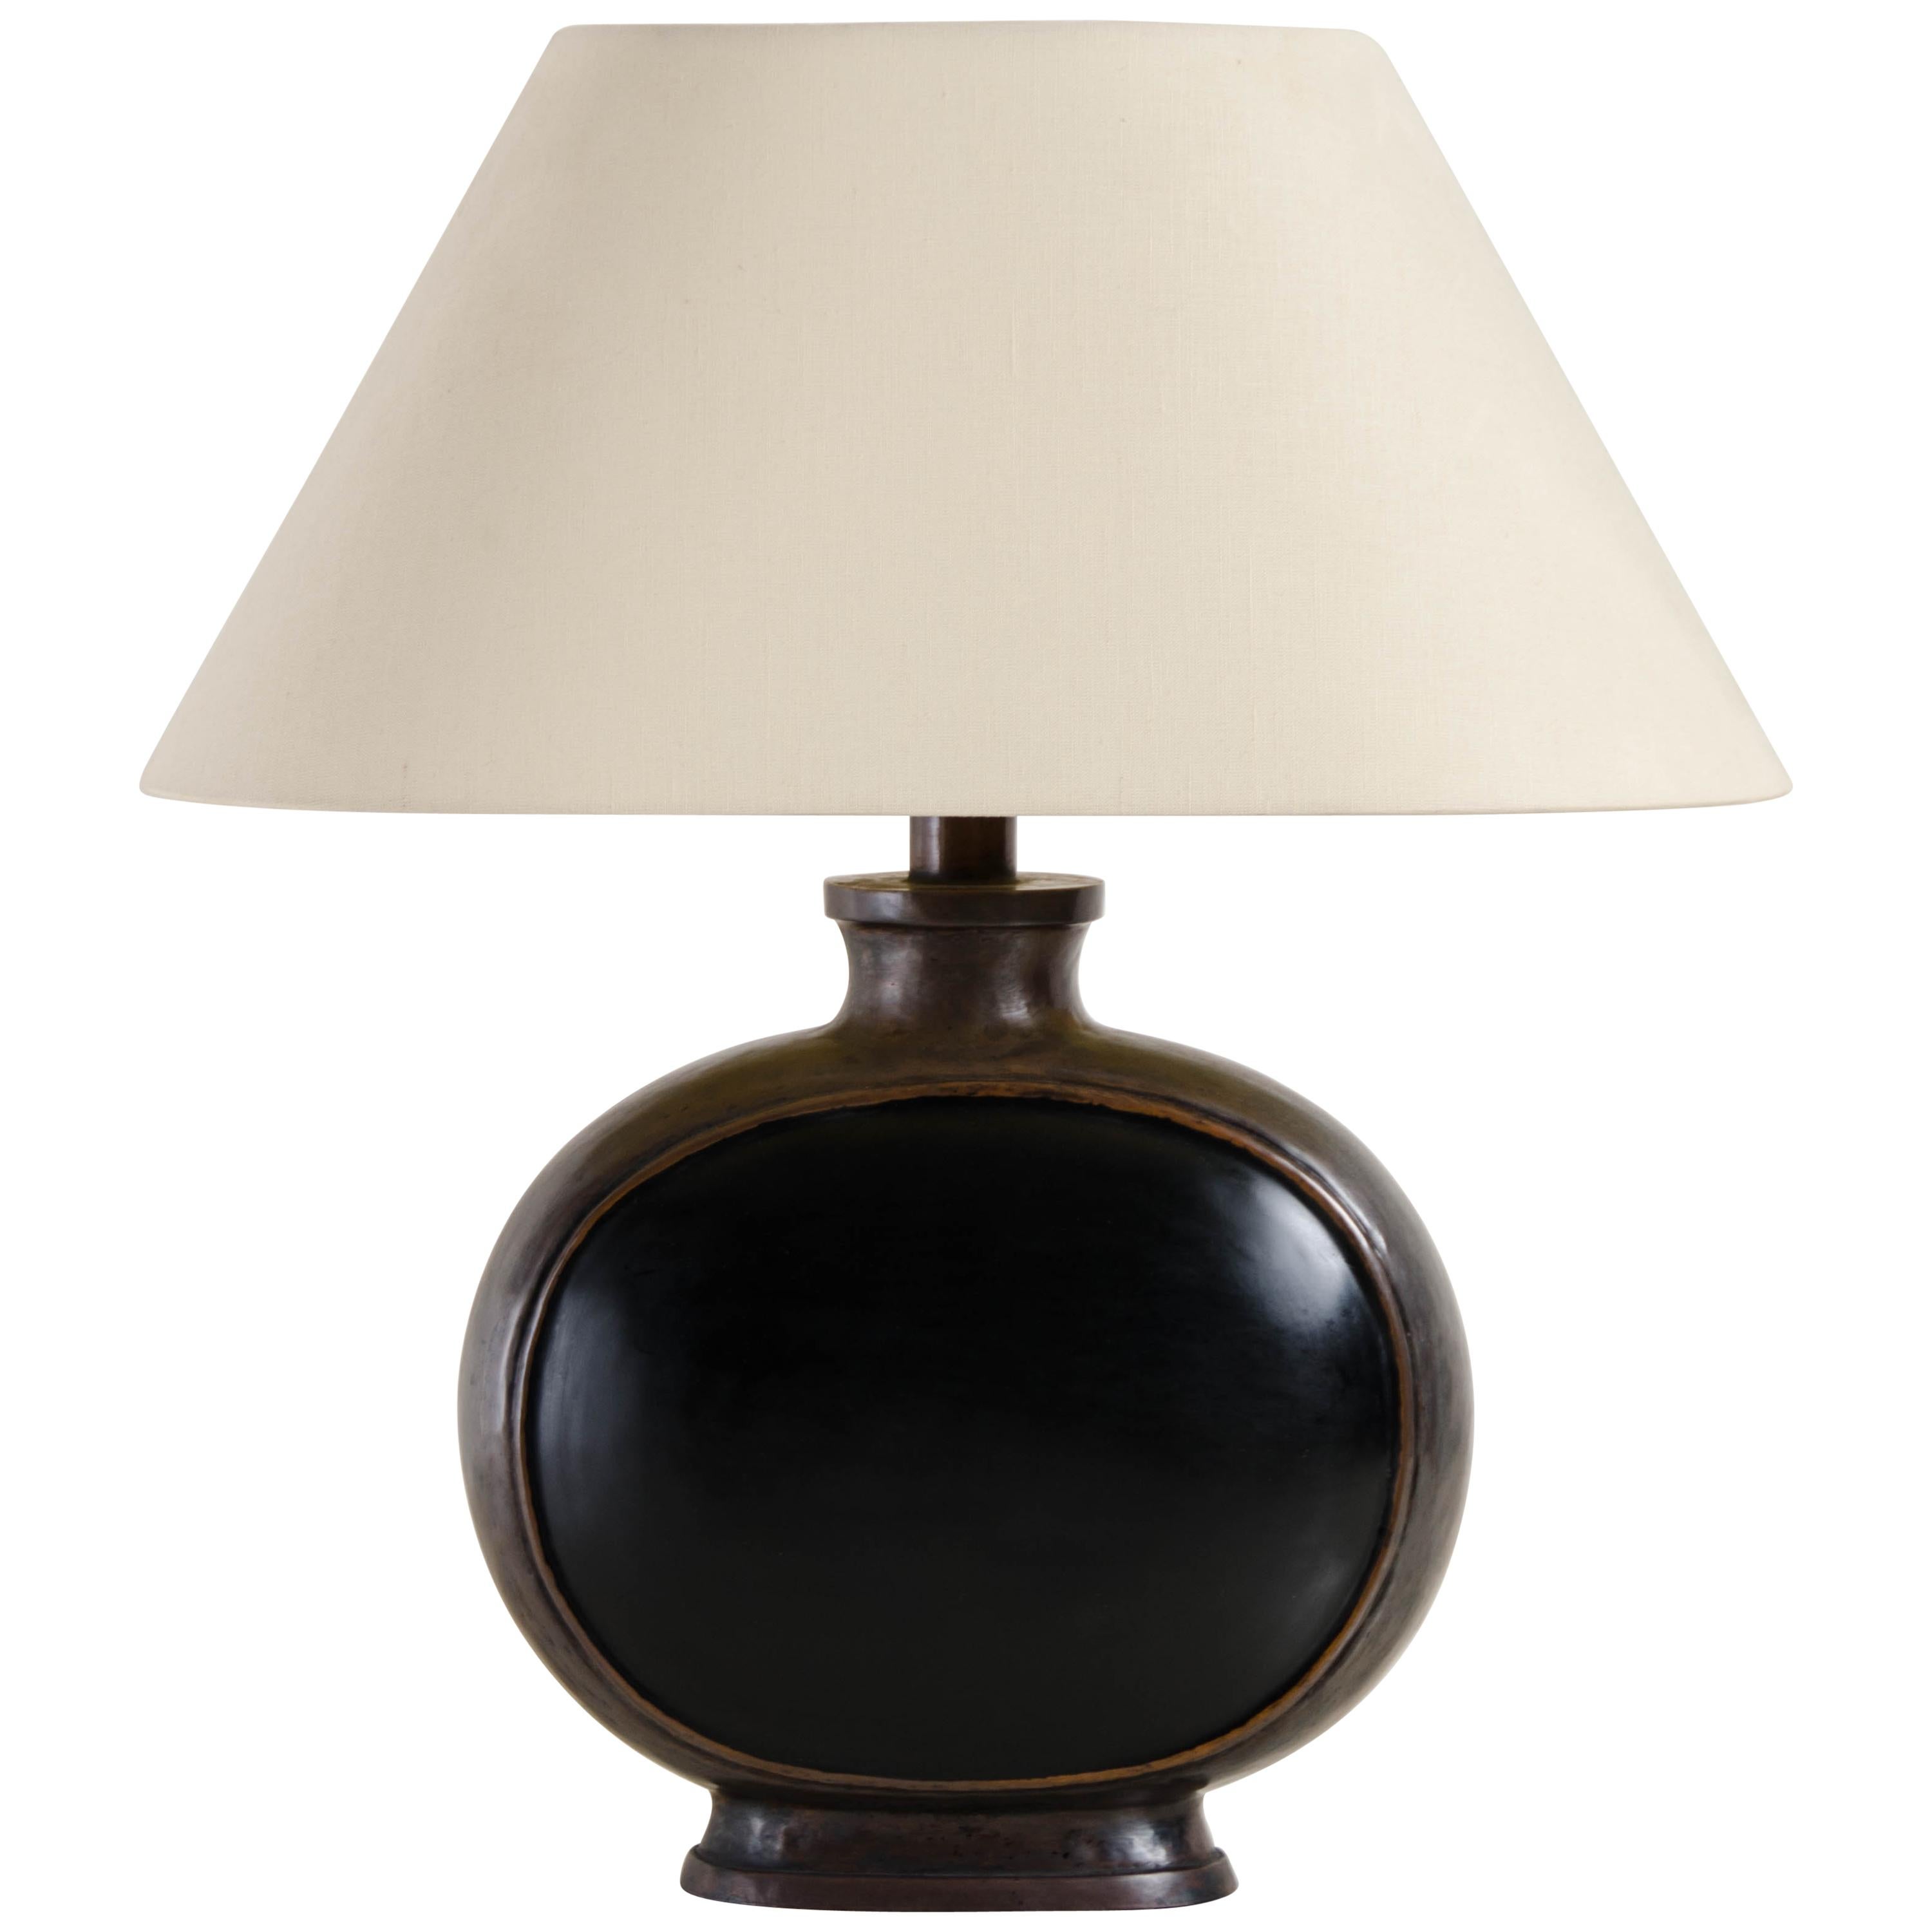 Bian Hu Table Lamp, Black Lacquer and Copper by Robert Kuo, Hand Repoussé For Sale